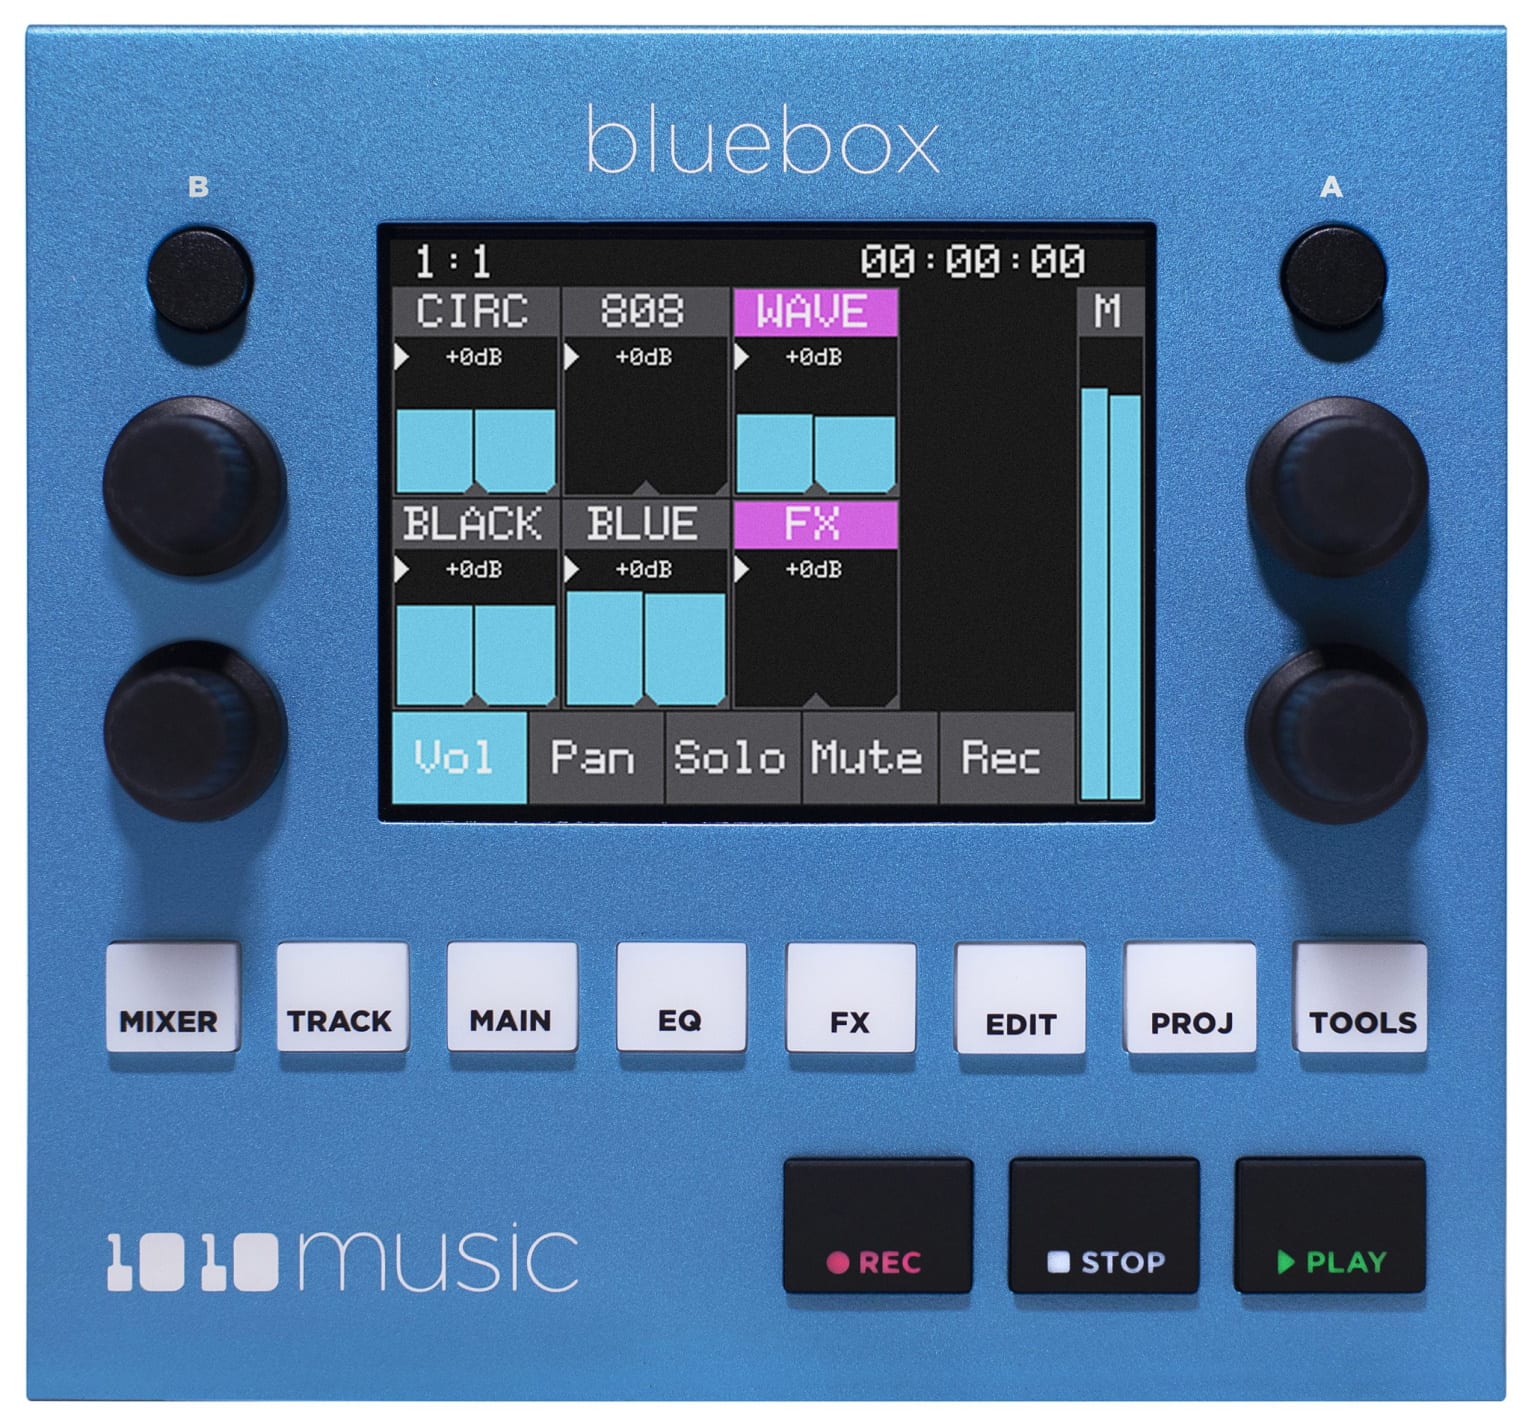 1010 Music Bluebox - front